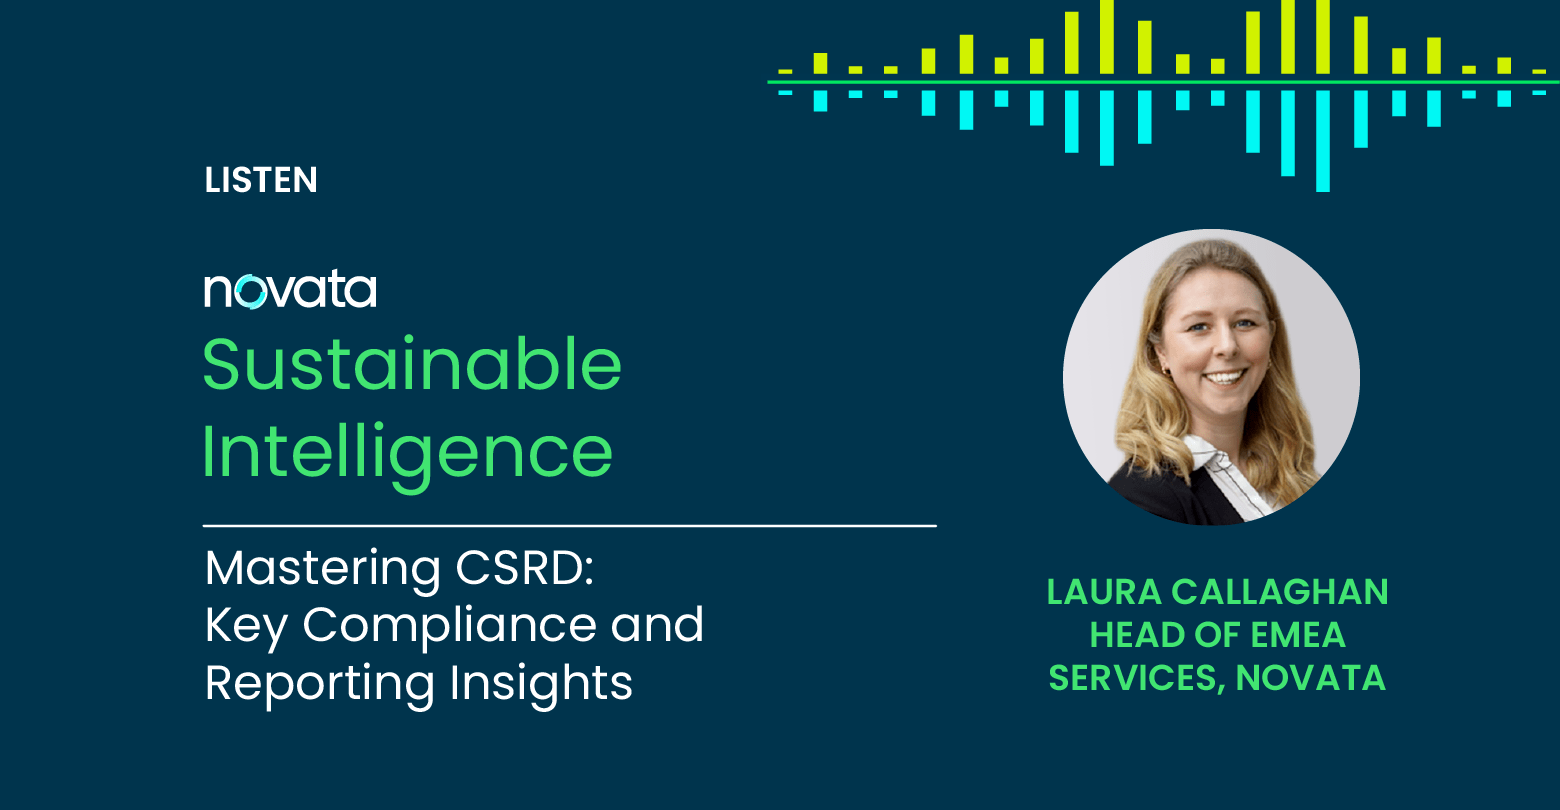 Novata Sustainable Intelligence: Mastering CSRD: Key Compliance and Reporting Insights